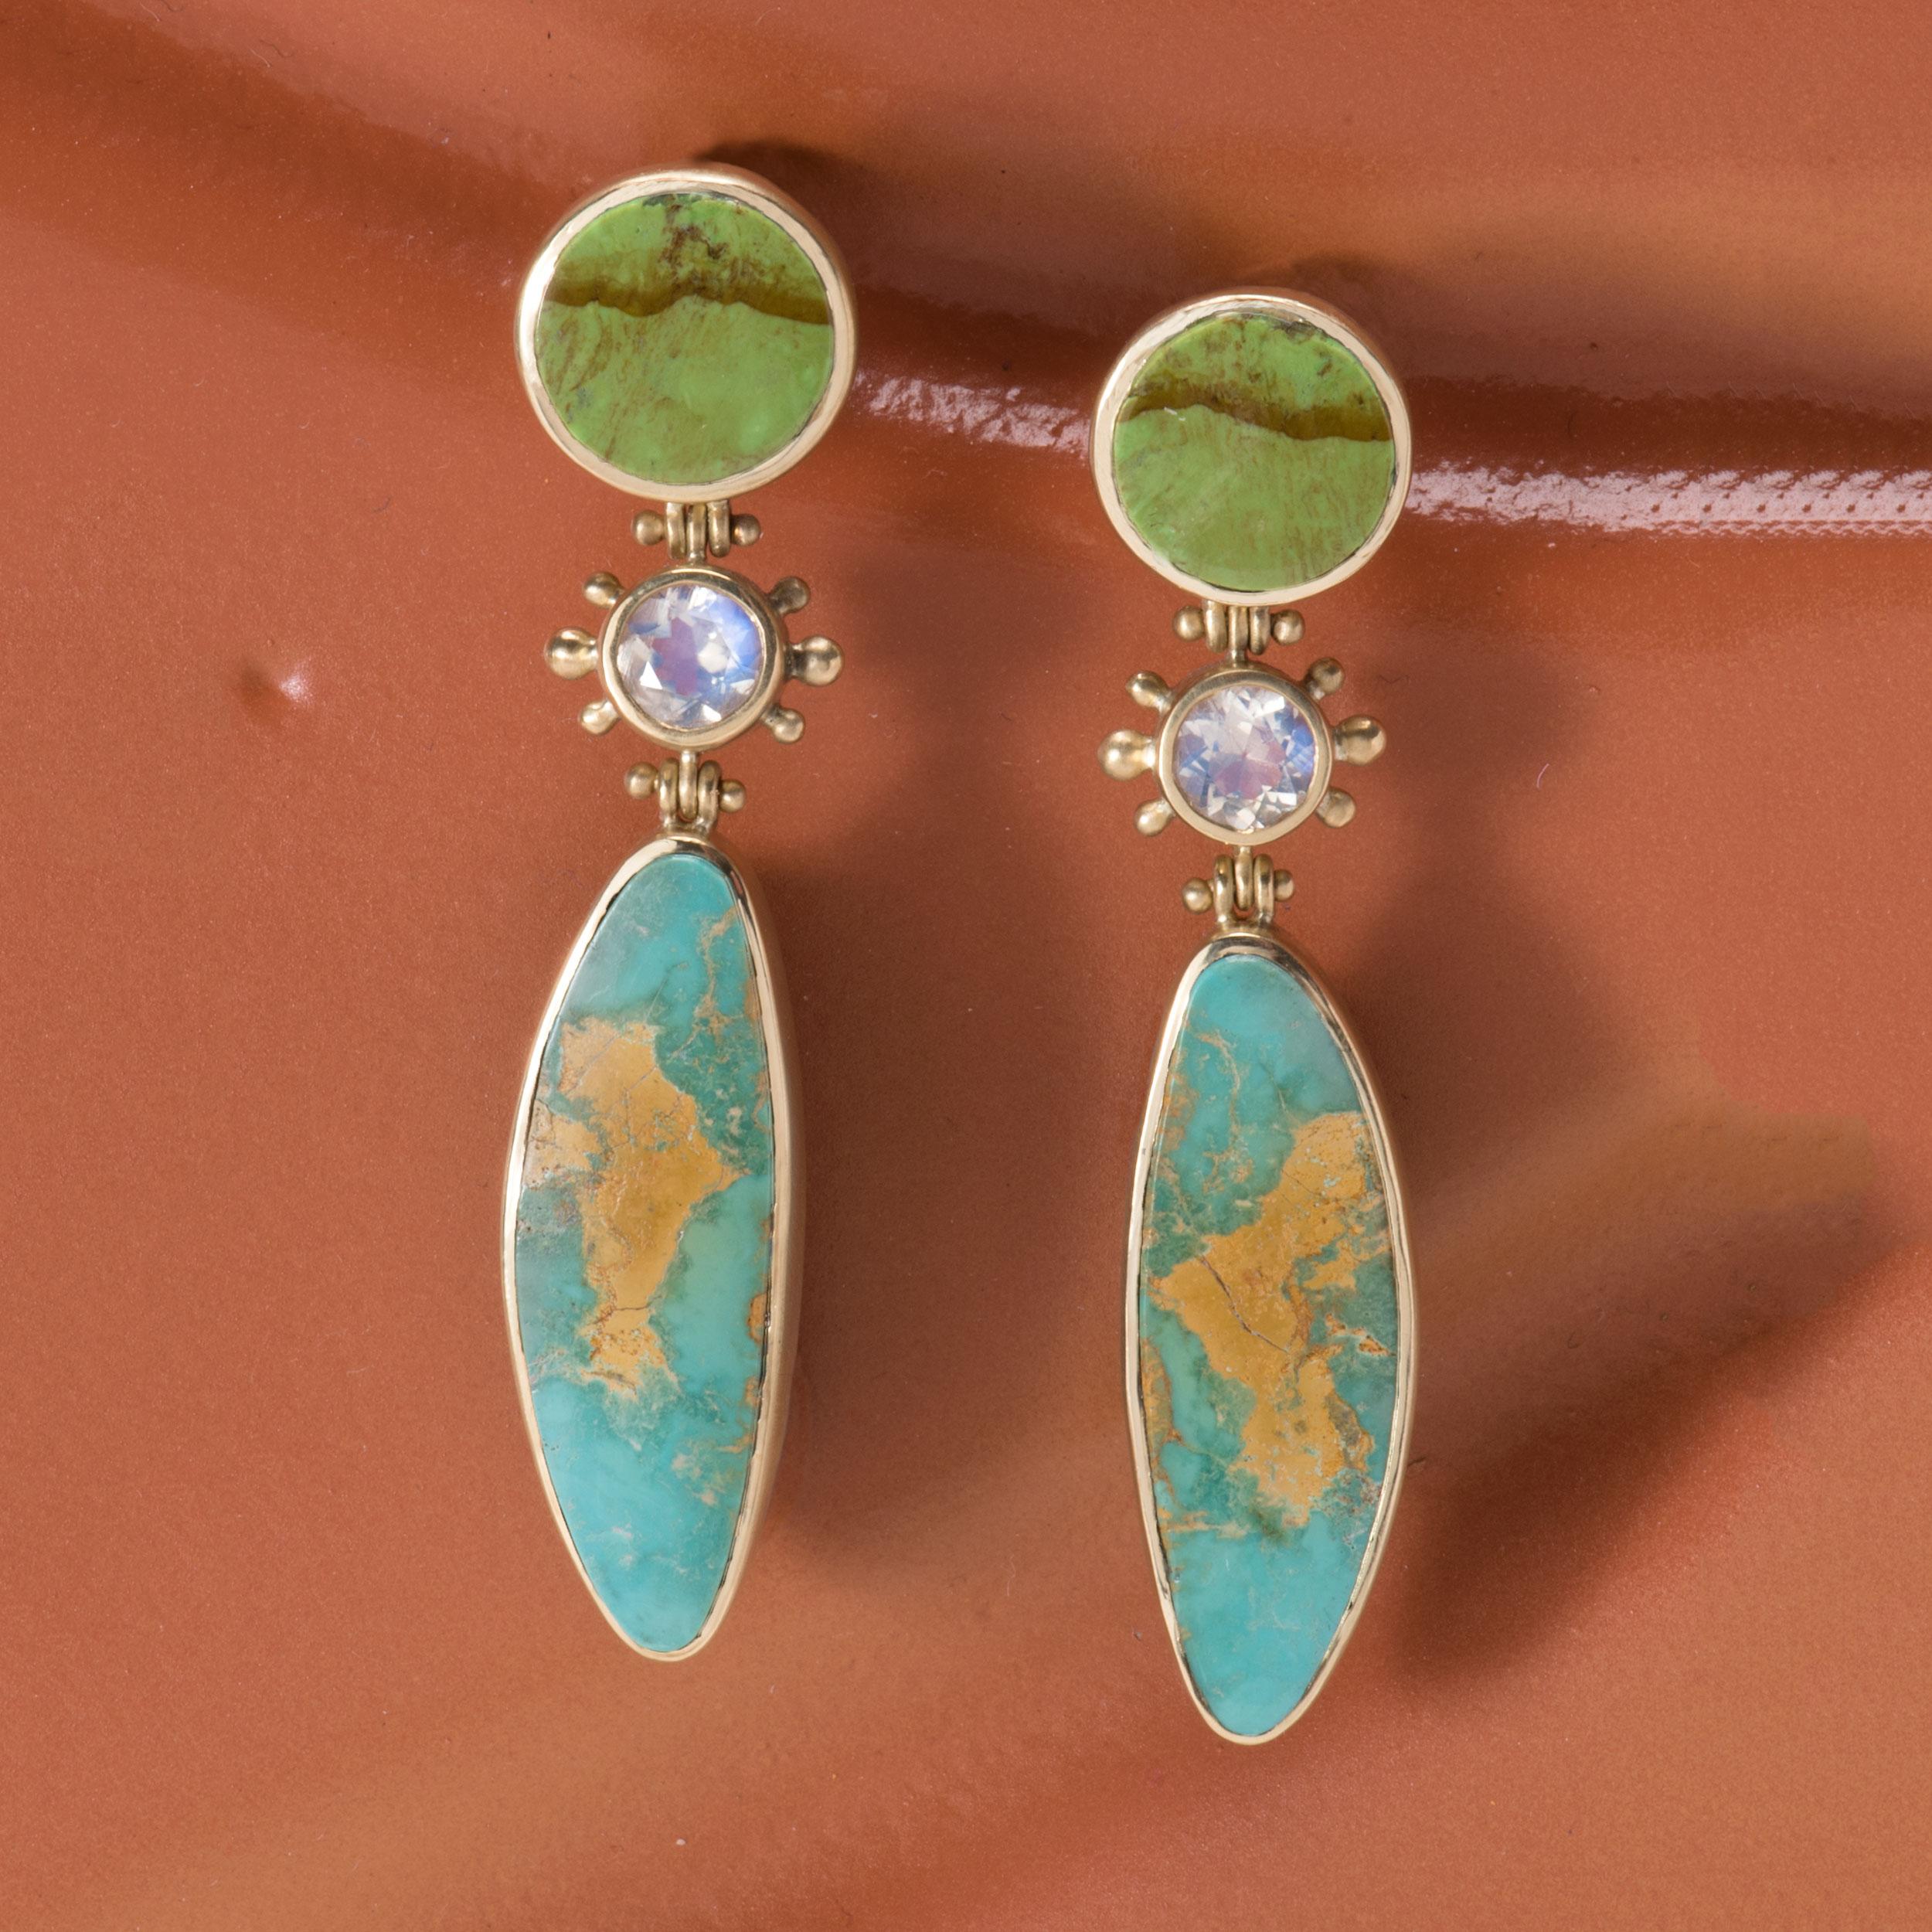 Natural Evans Turquoise from the Nevada mine in blue with an atlas of light rust-colored matrix, drop from faceted moonstones in beaded bezel settings and are topped with disks of Australian Gaspeite with a horizontal pattern of medium brown. These